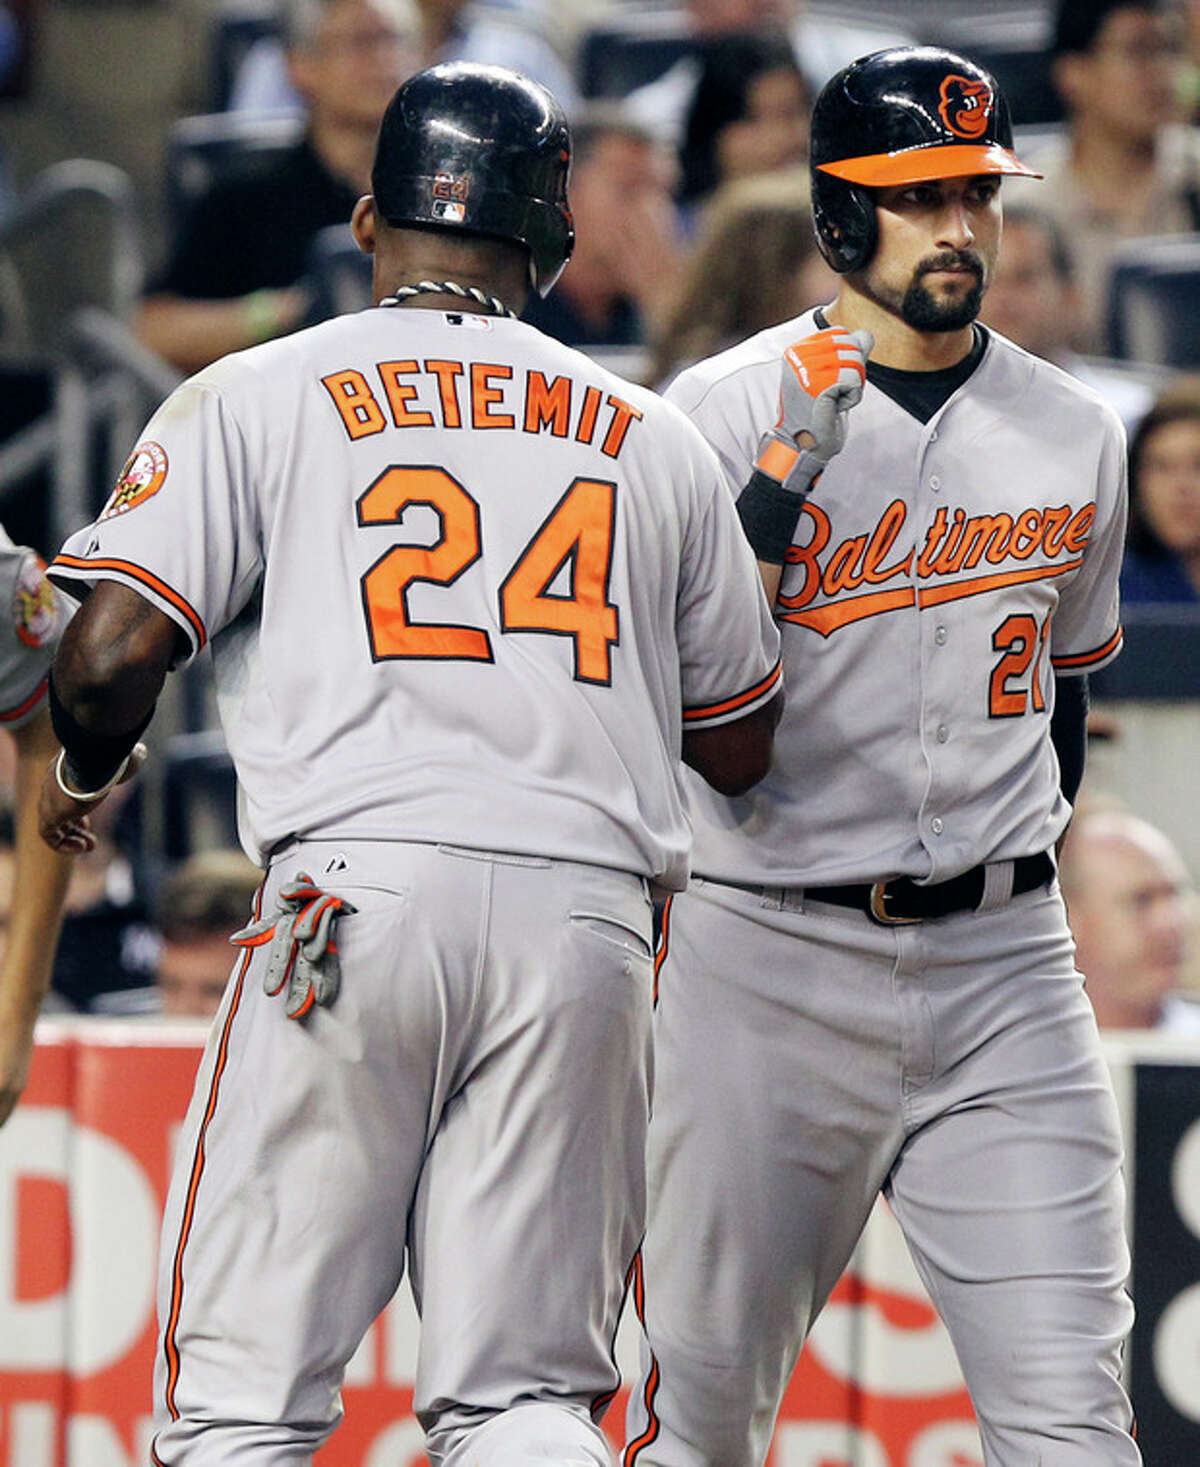 Baltimore Orioles' Nick Markakis, right, greets Wilson Betemit after Betemit scored on a hit by Omar Quintanilla during the fifth inning of a baseball game against the New York Yankees, Monday, July 30, 2012, at Yankee Stadium in New York. (AP Photo/Seth Wenig)